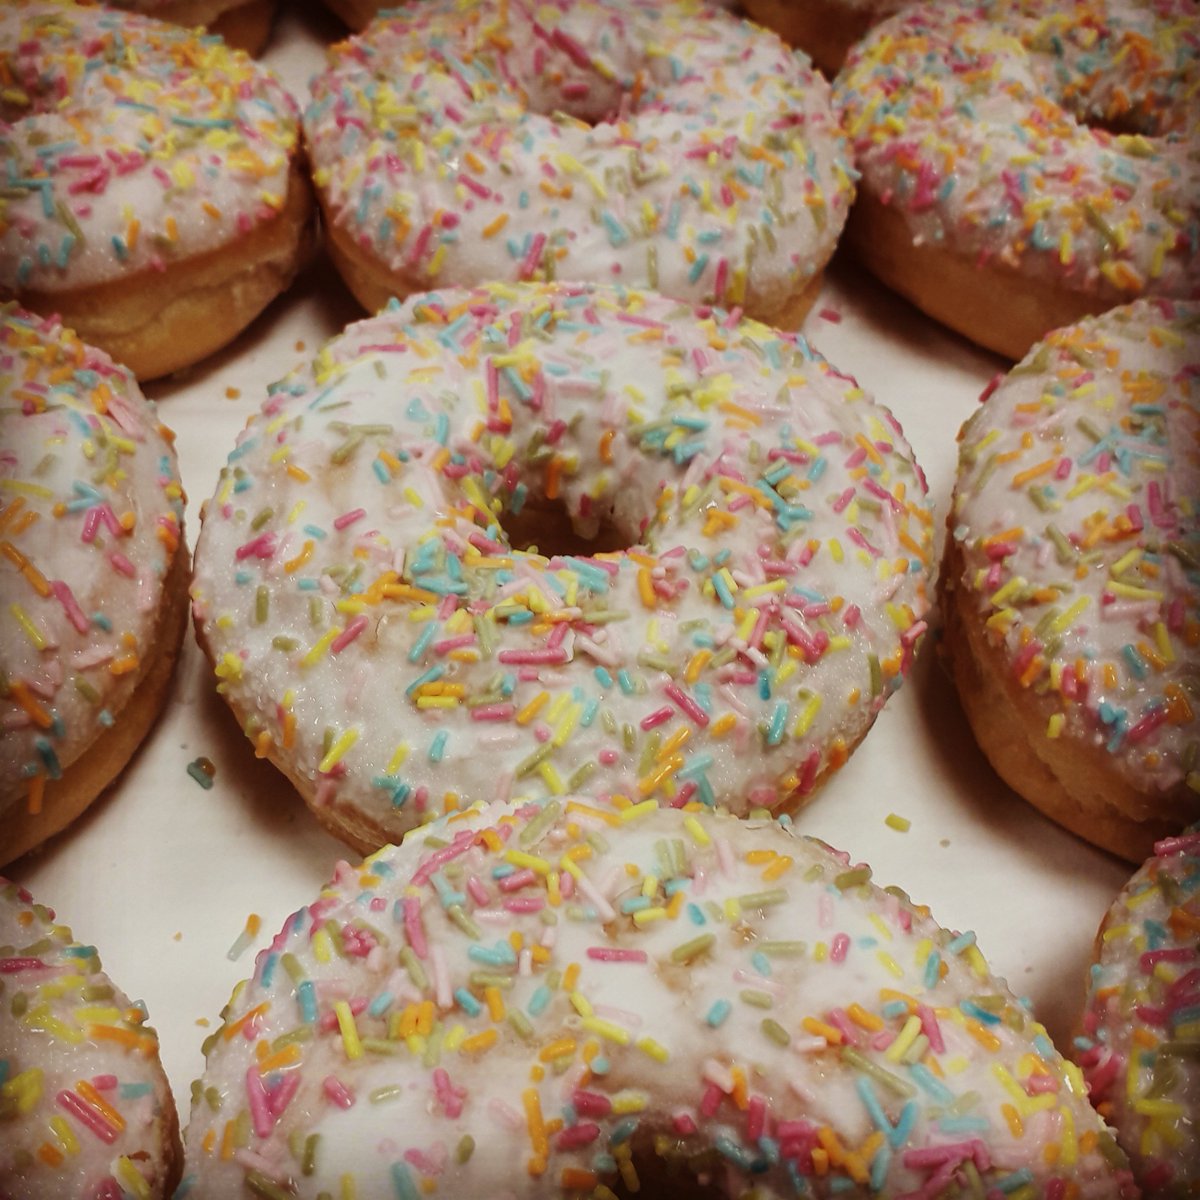 Happy Birthday Colin from everyone at Business First! Now to get our donut on #workbirthday #businessfirstsolutions #donutparty #happybirthday #birthdaytreats #norwichbusinesses #norfolk #norfolkbusinessnetwork